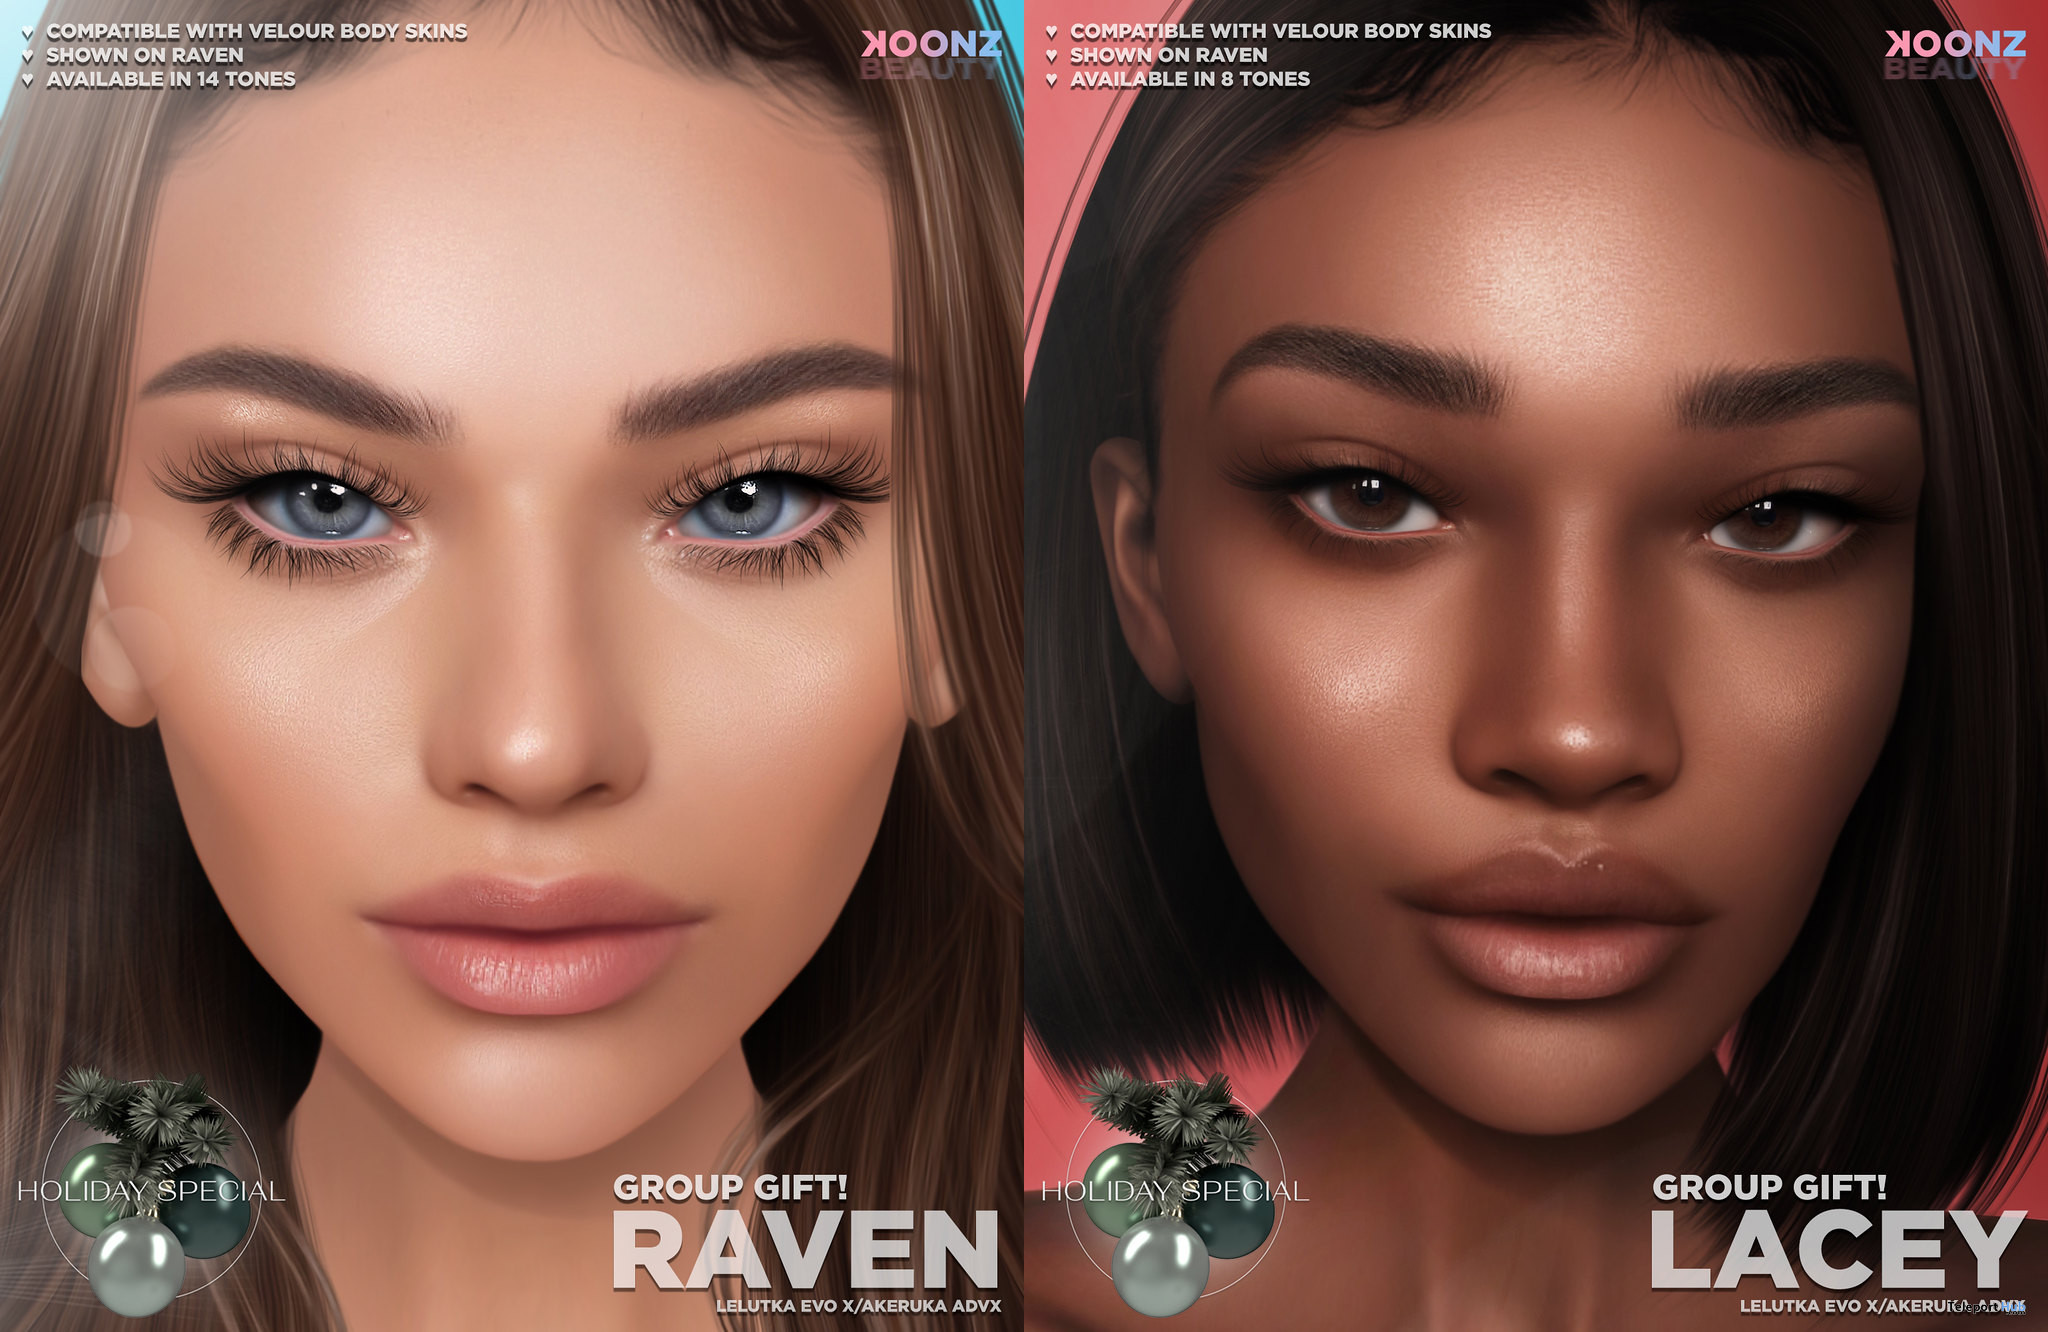 Lacey & Raven Skin Fatpack December 2022 Group Gift by KOONZ Beauty - Teleport Hub - teleporthub.com